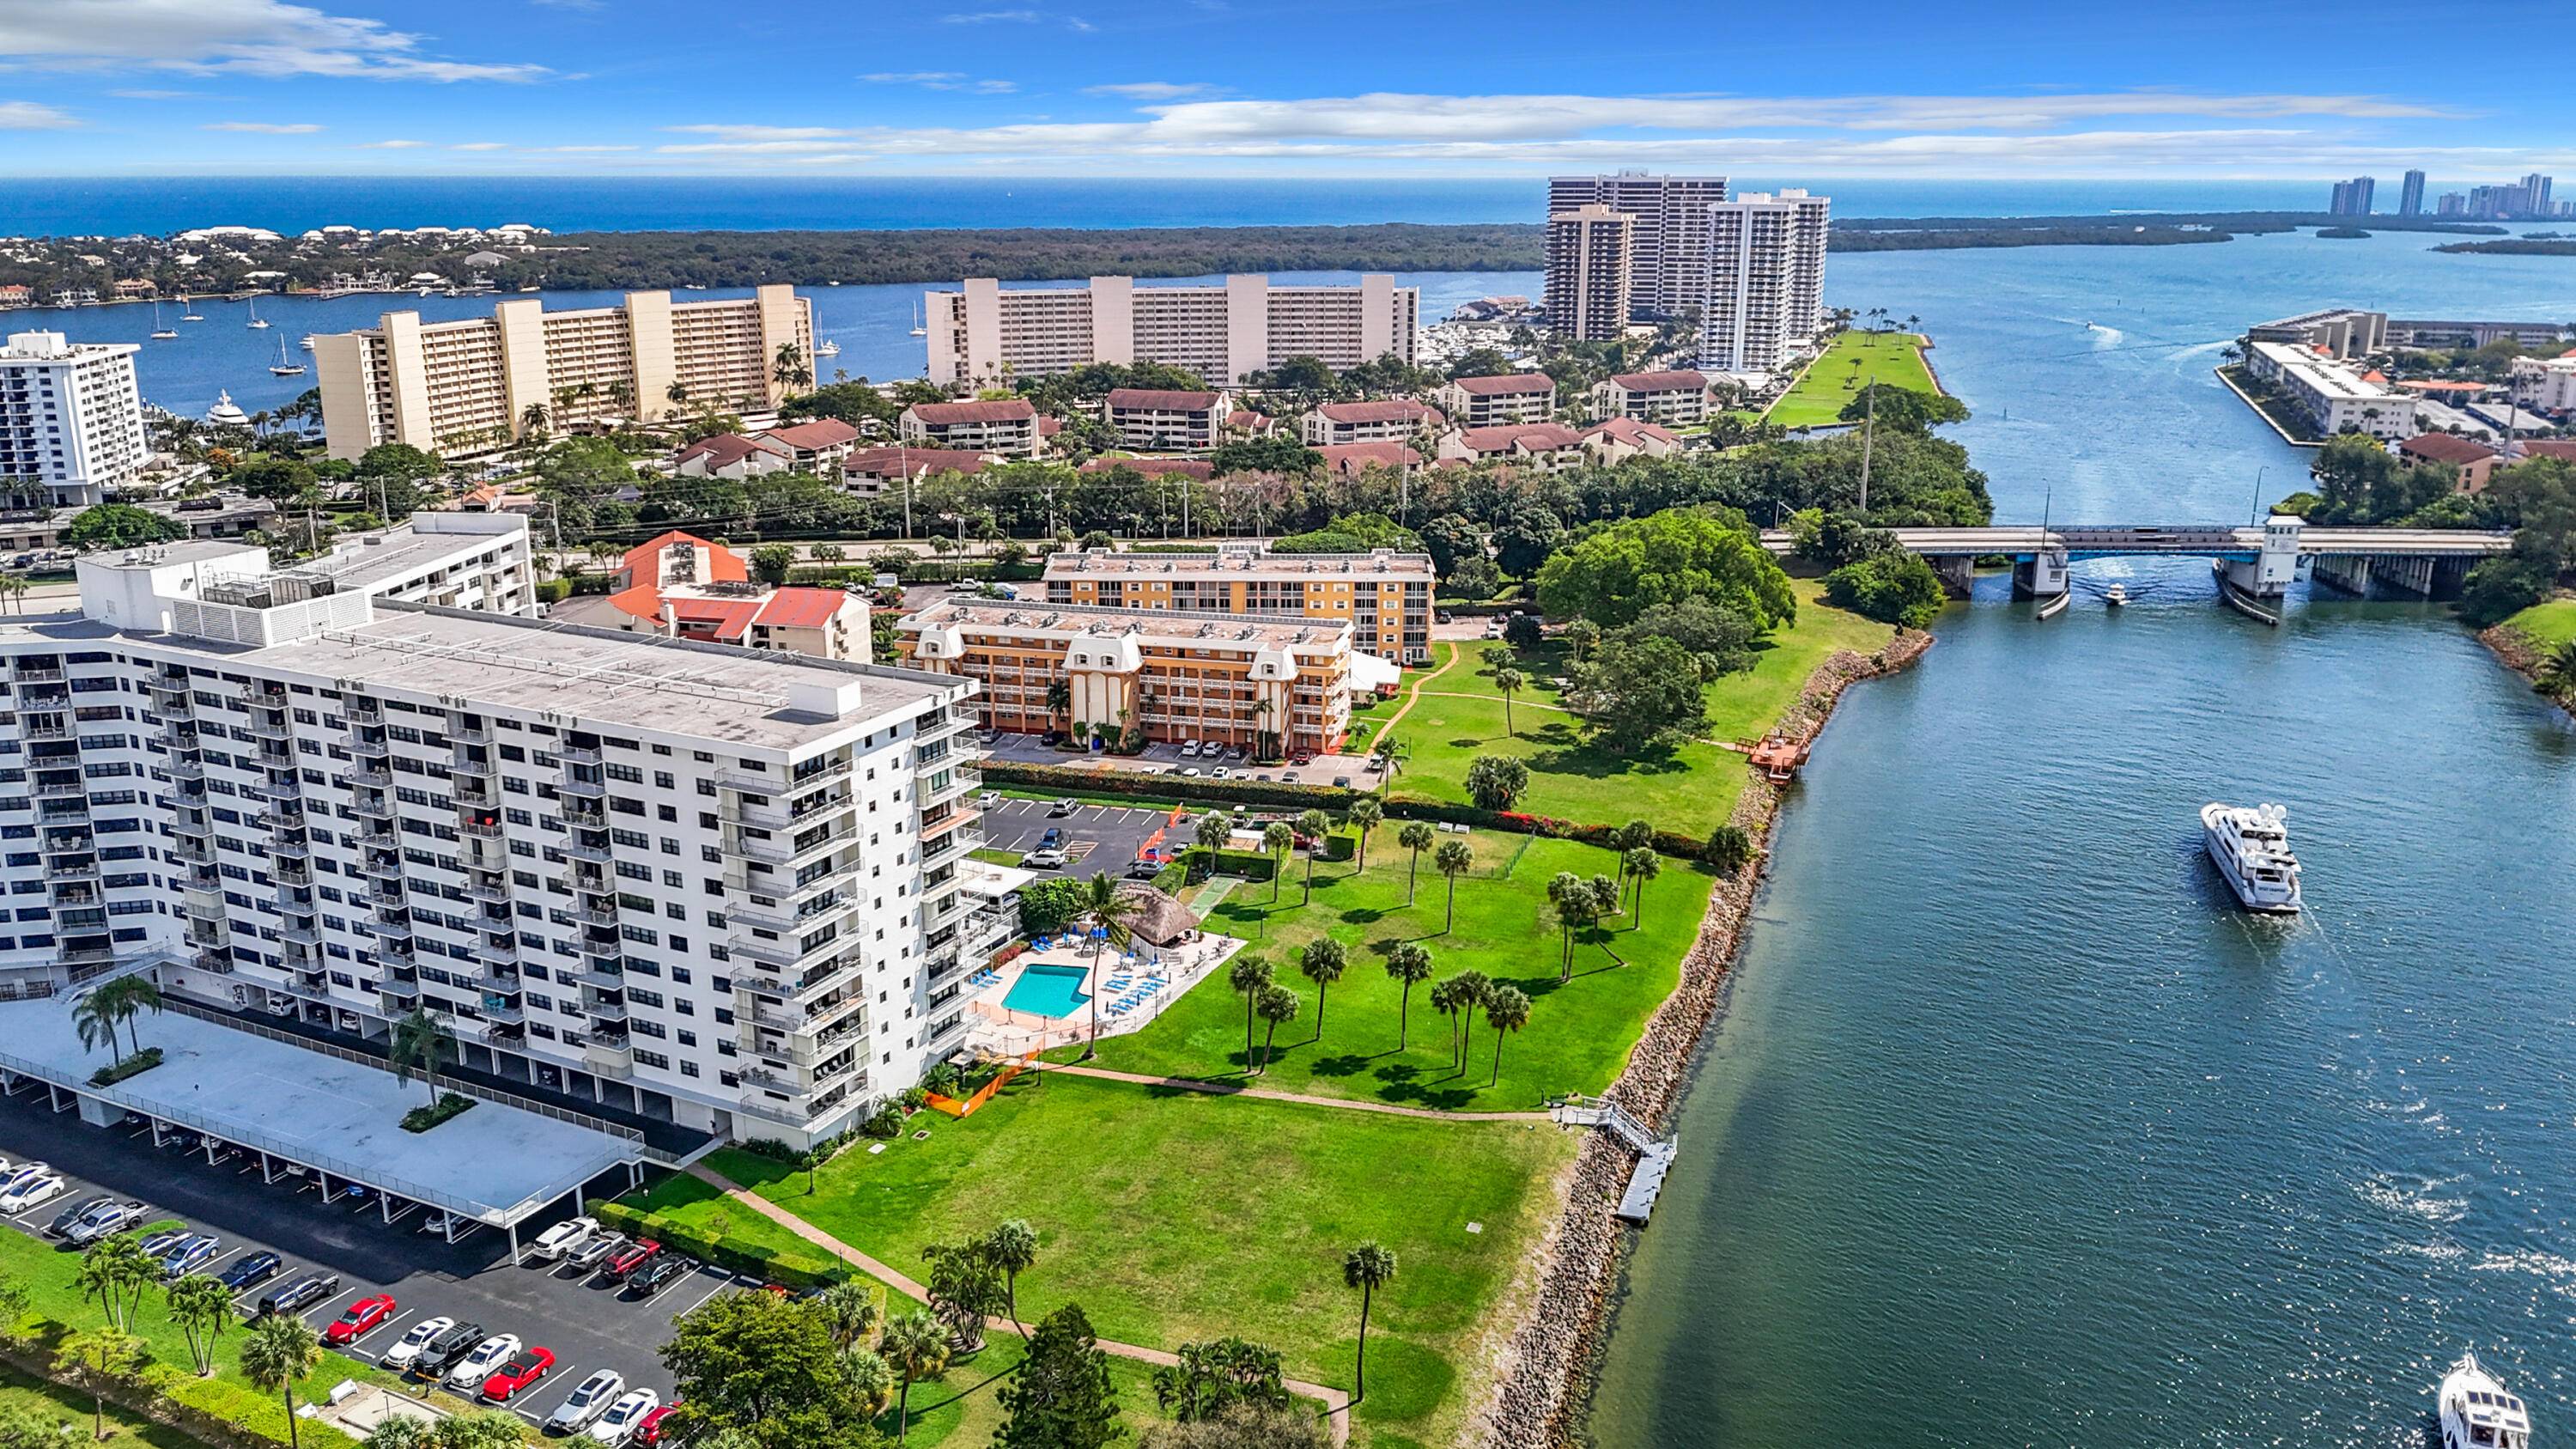 New List Price ! Enjoy intracoastal golf views from this stunning condo at Gemini where monthly condo fees cover EVERYTHING except electric !